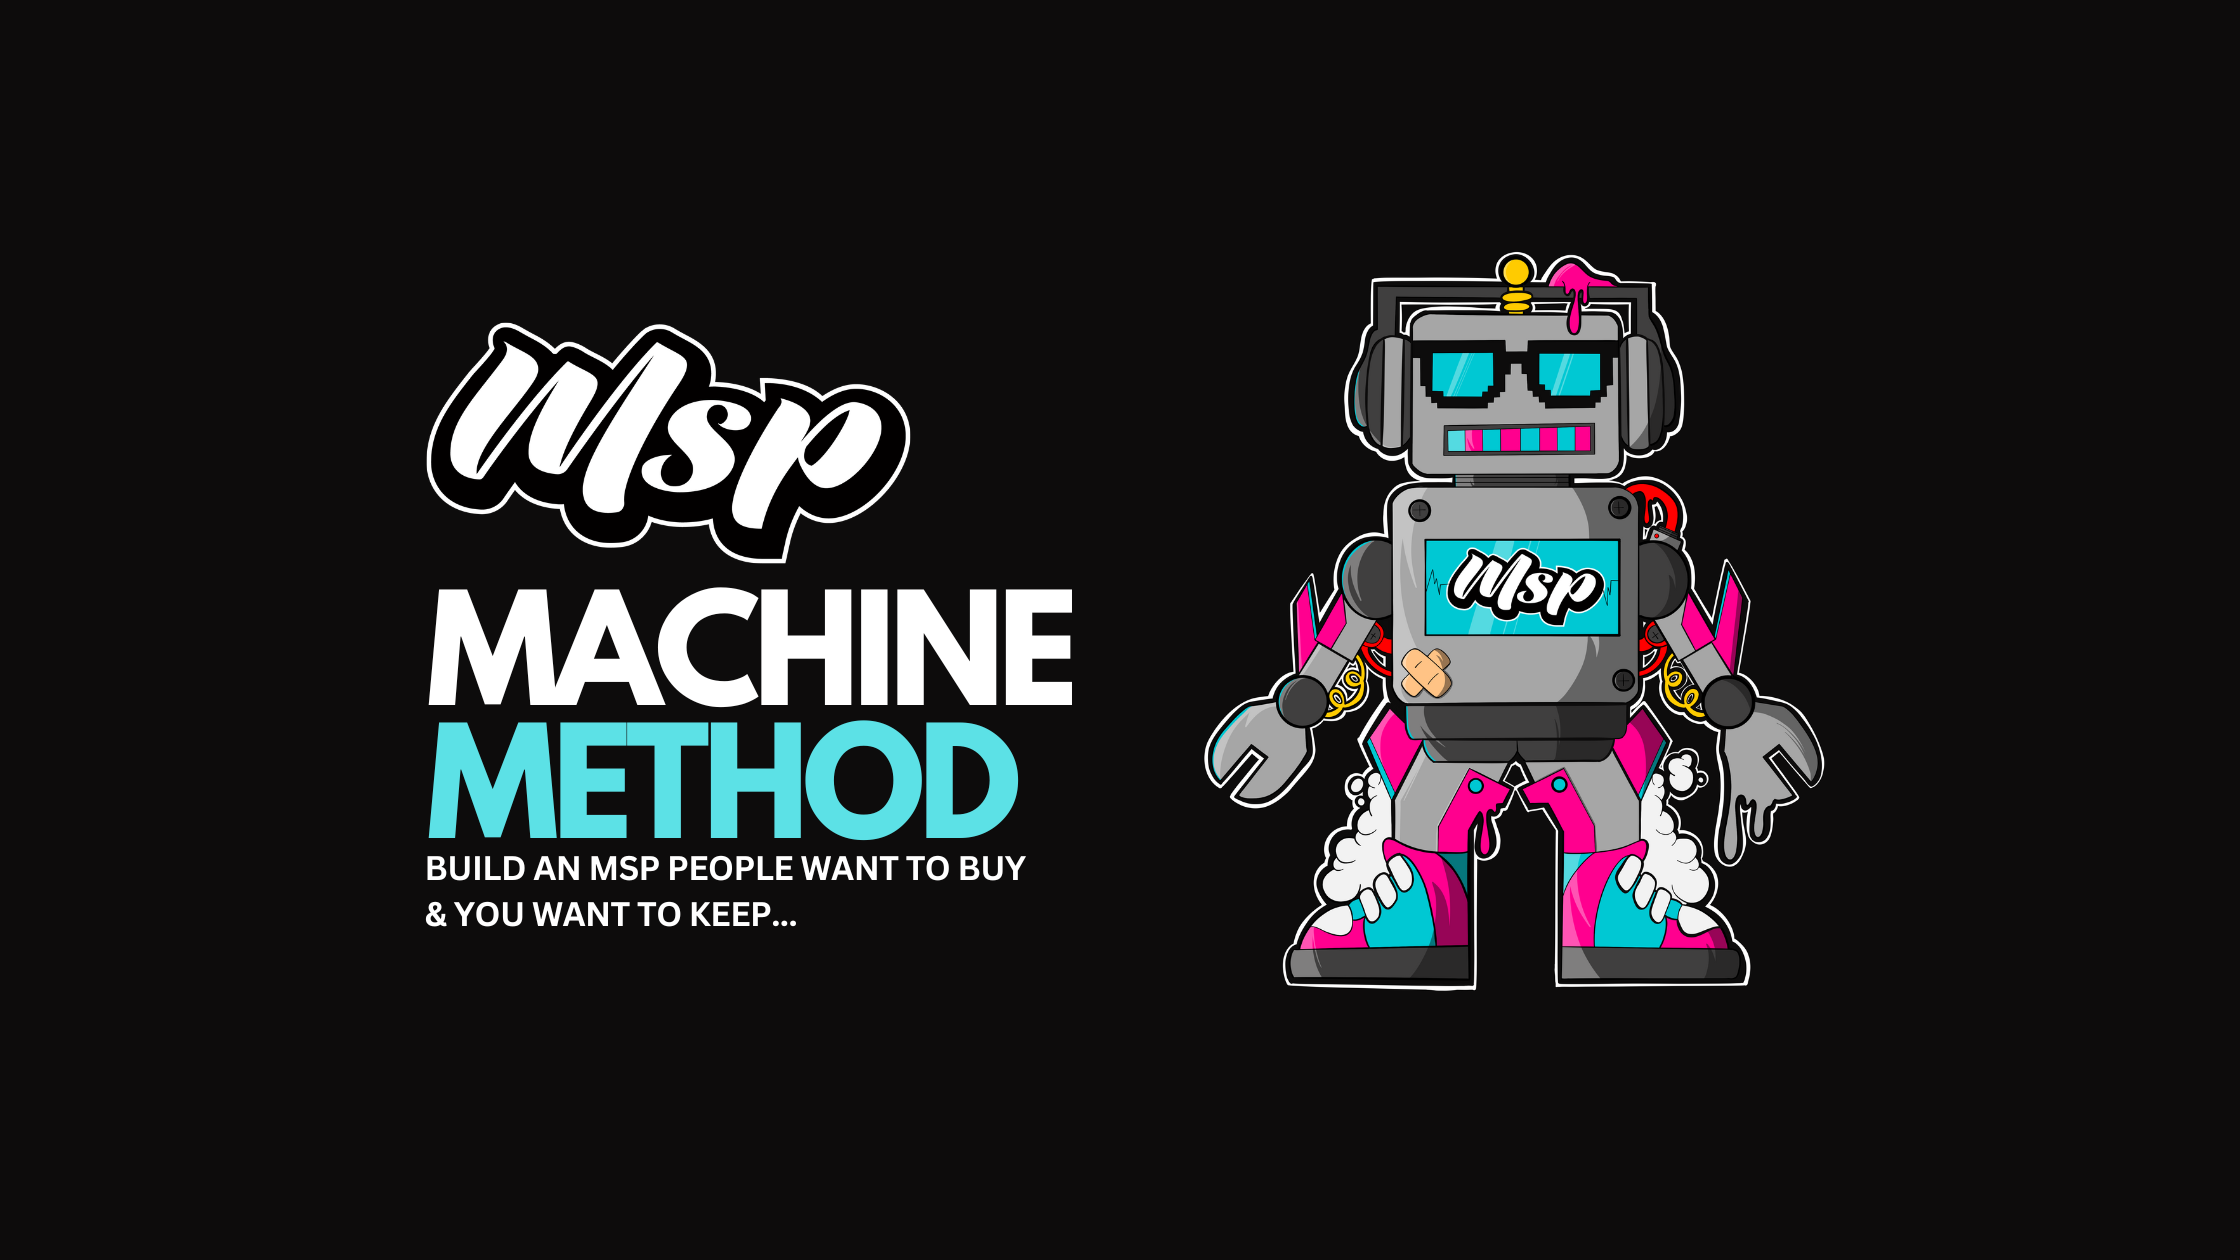 Build an MSP that people want to buy, and you want to keep; implement the ‘MSP Machine’ method.